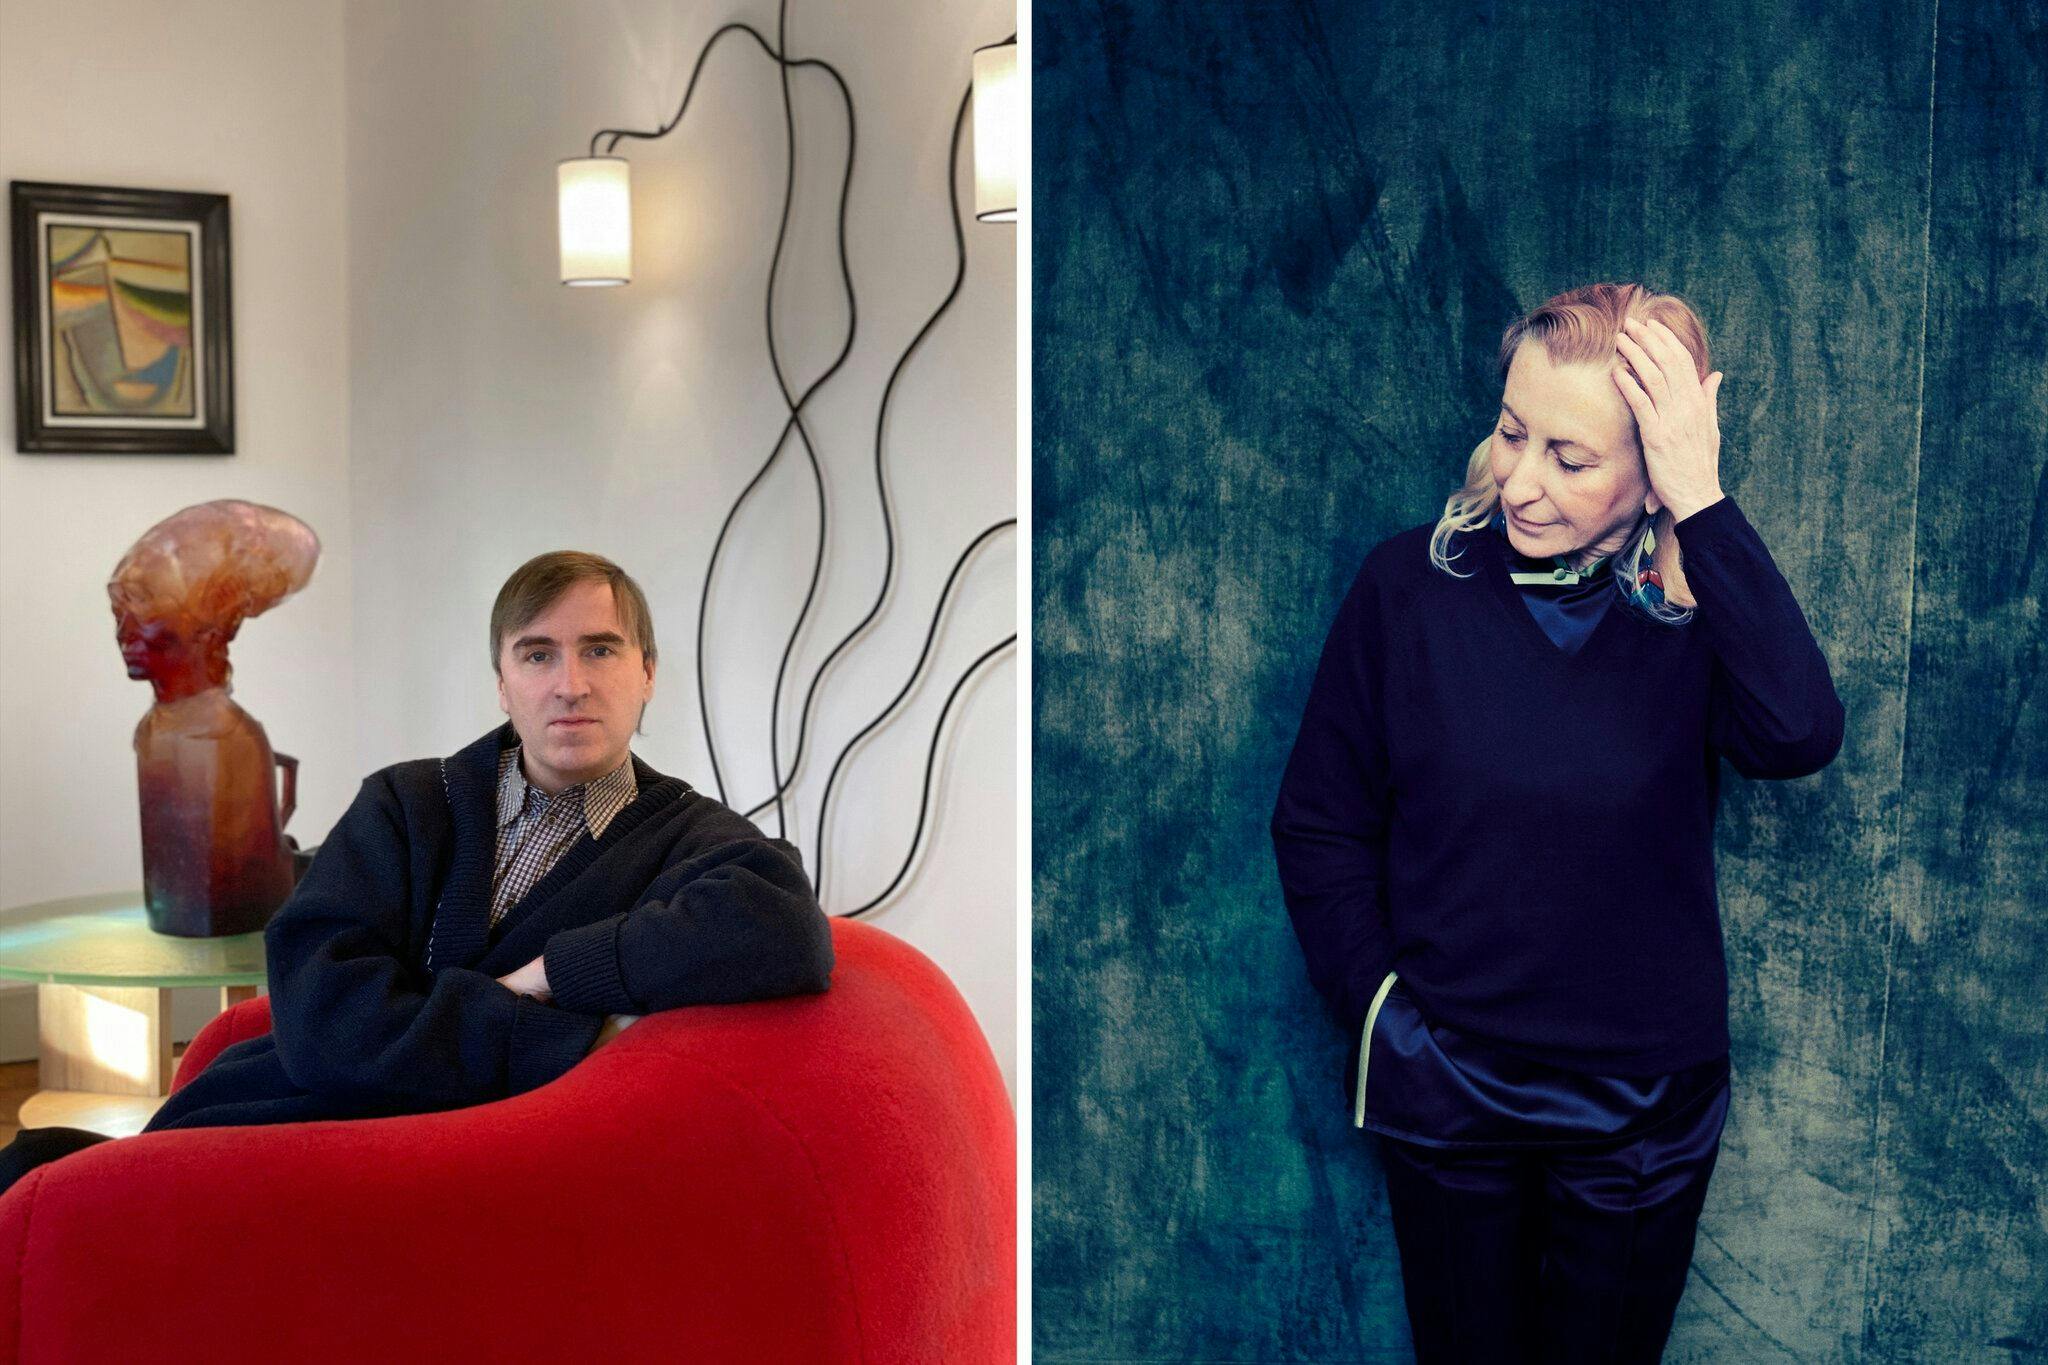 In an exclusive joint interview, Miuccia Prada and Raf Simons talk about working together, what to expect in their debut men’s collection and why they think the fashion world isn’t going to change.